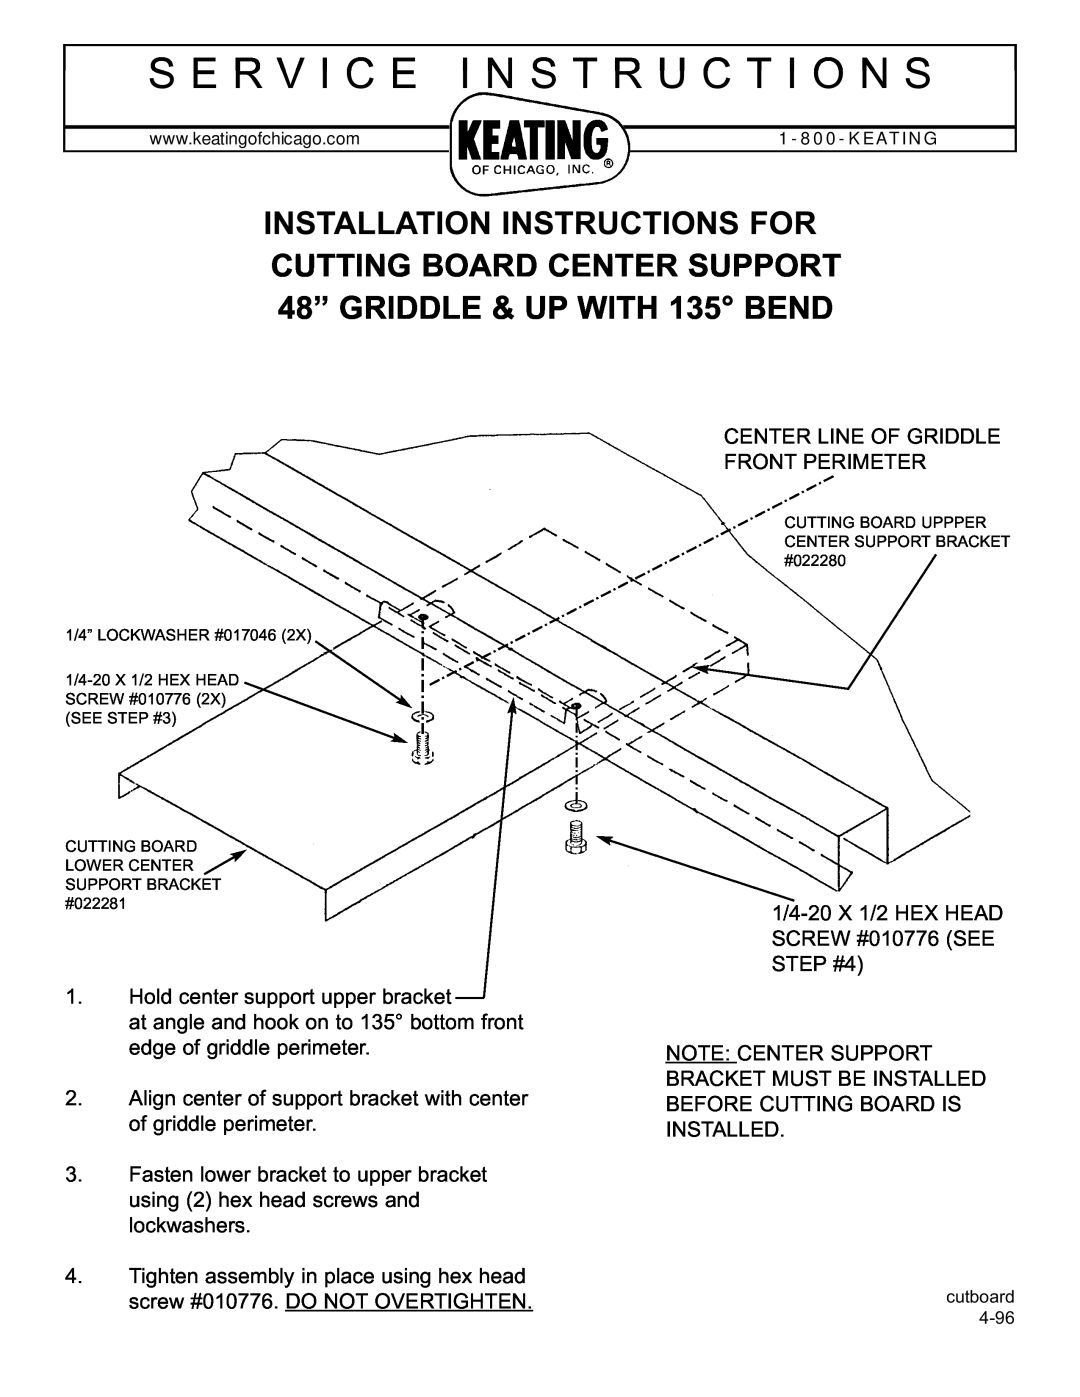 Keating Of Chicago 48" Griddle installation instructions S E R V I C E I N S T R U C T I O N S 